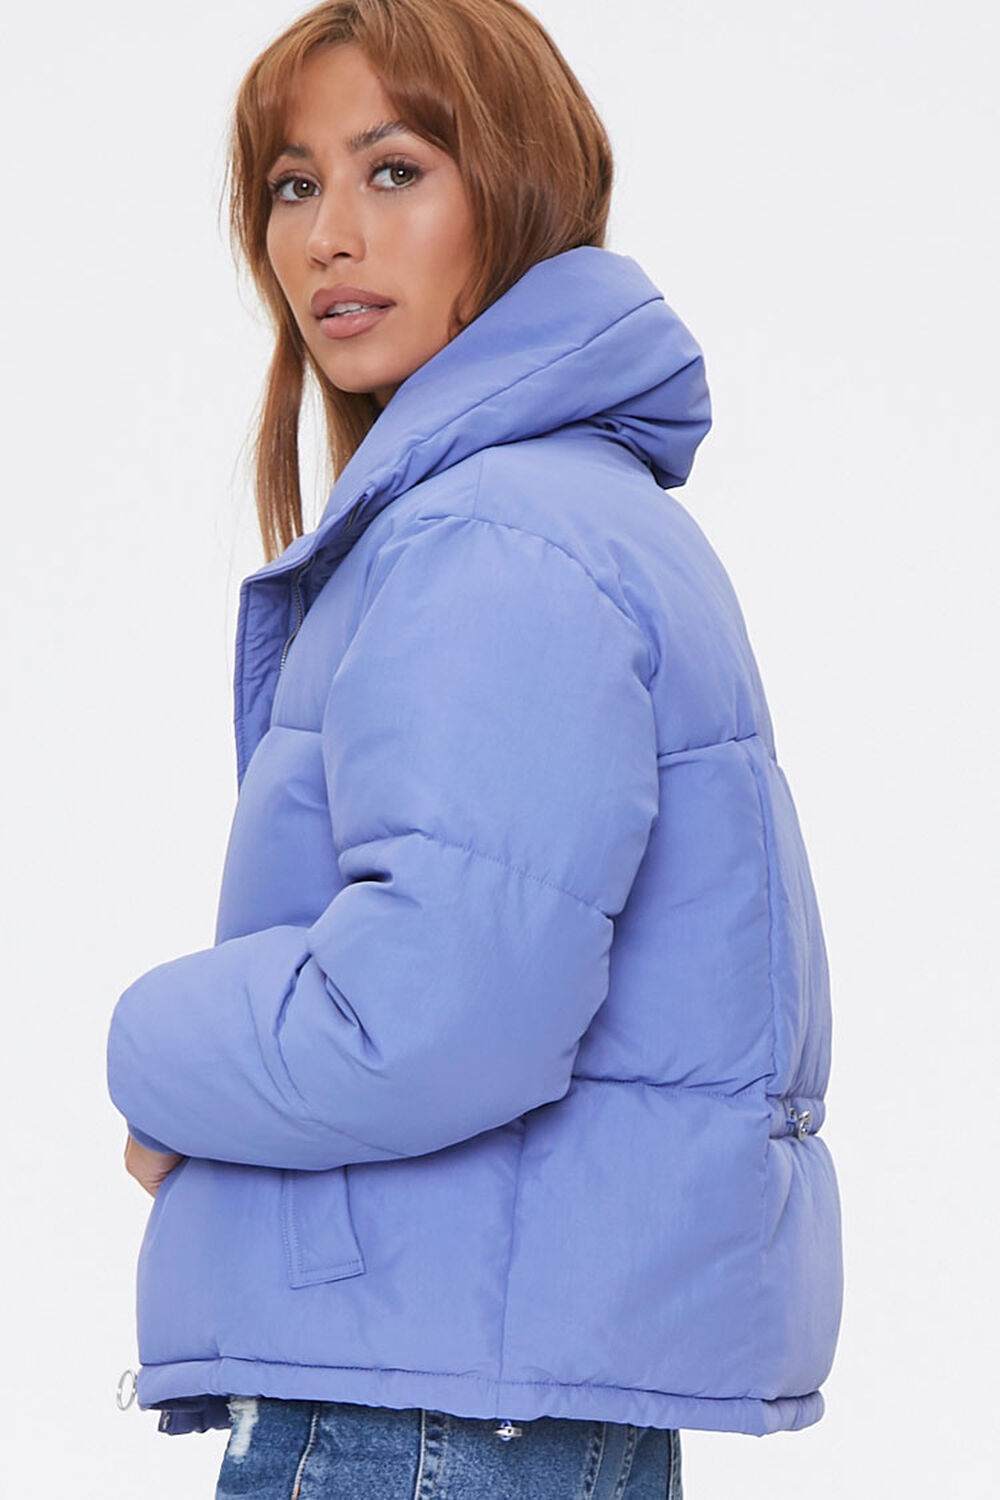 PERIWINKLE Pull-Ring Puffer Jacket, image 2